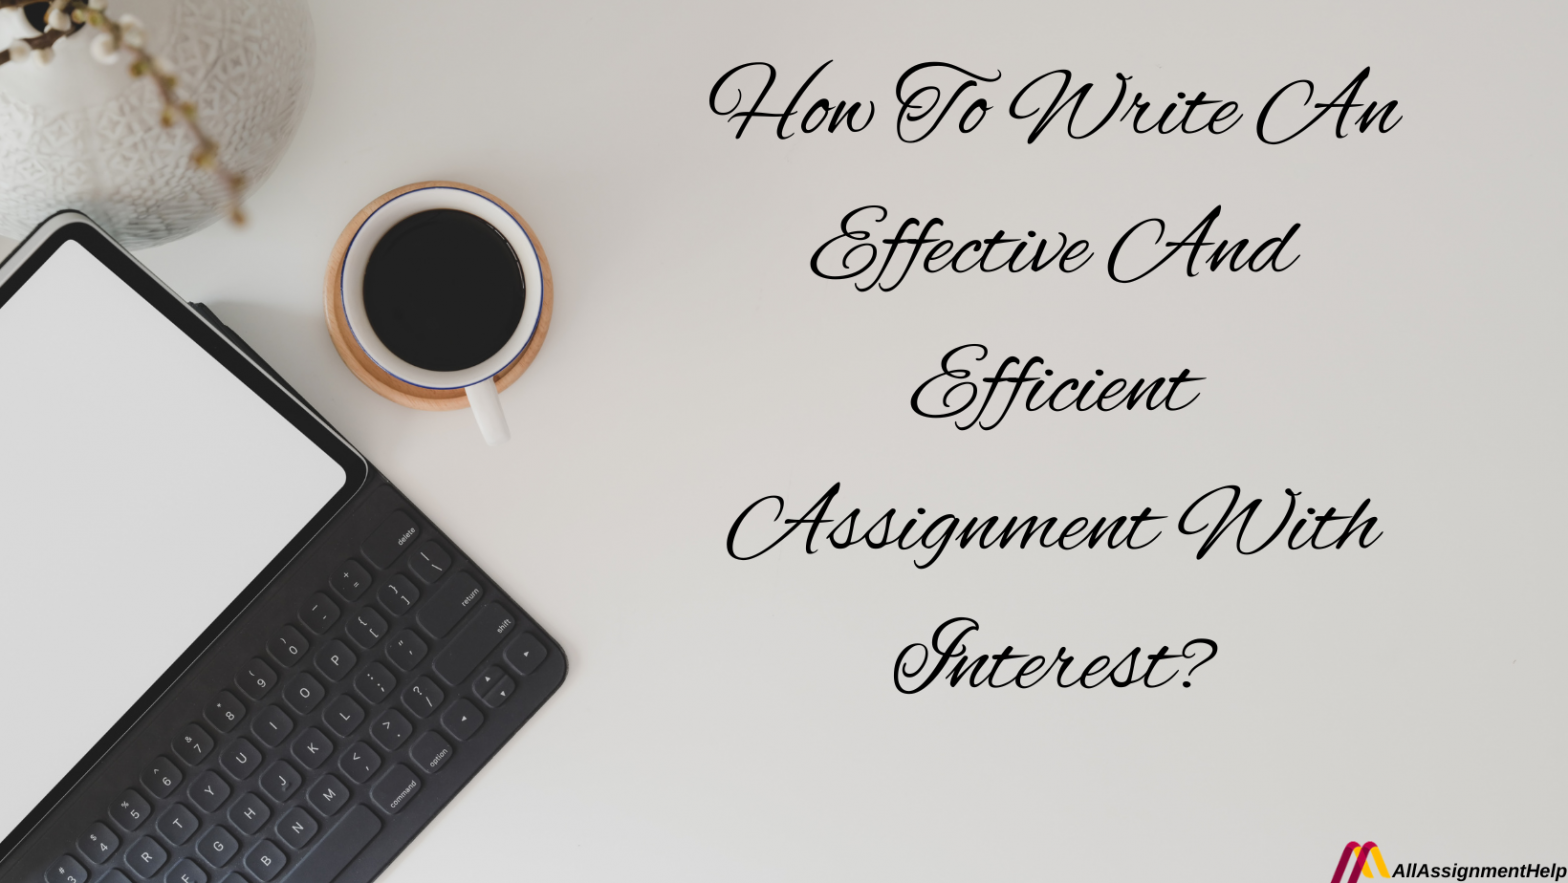 How To Write An Effective And Efficient Assignment With Interest?